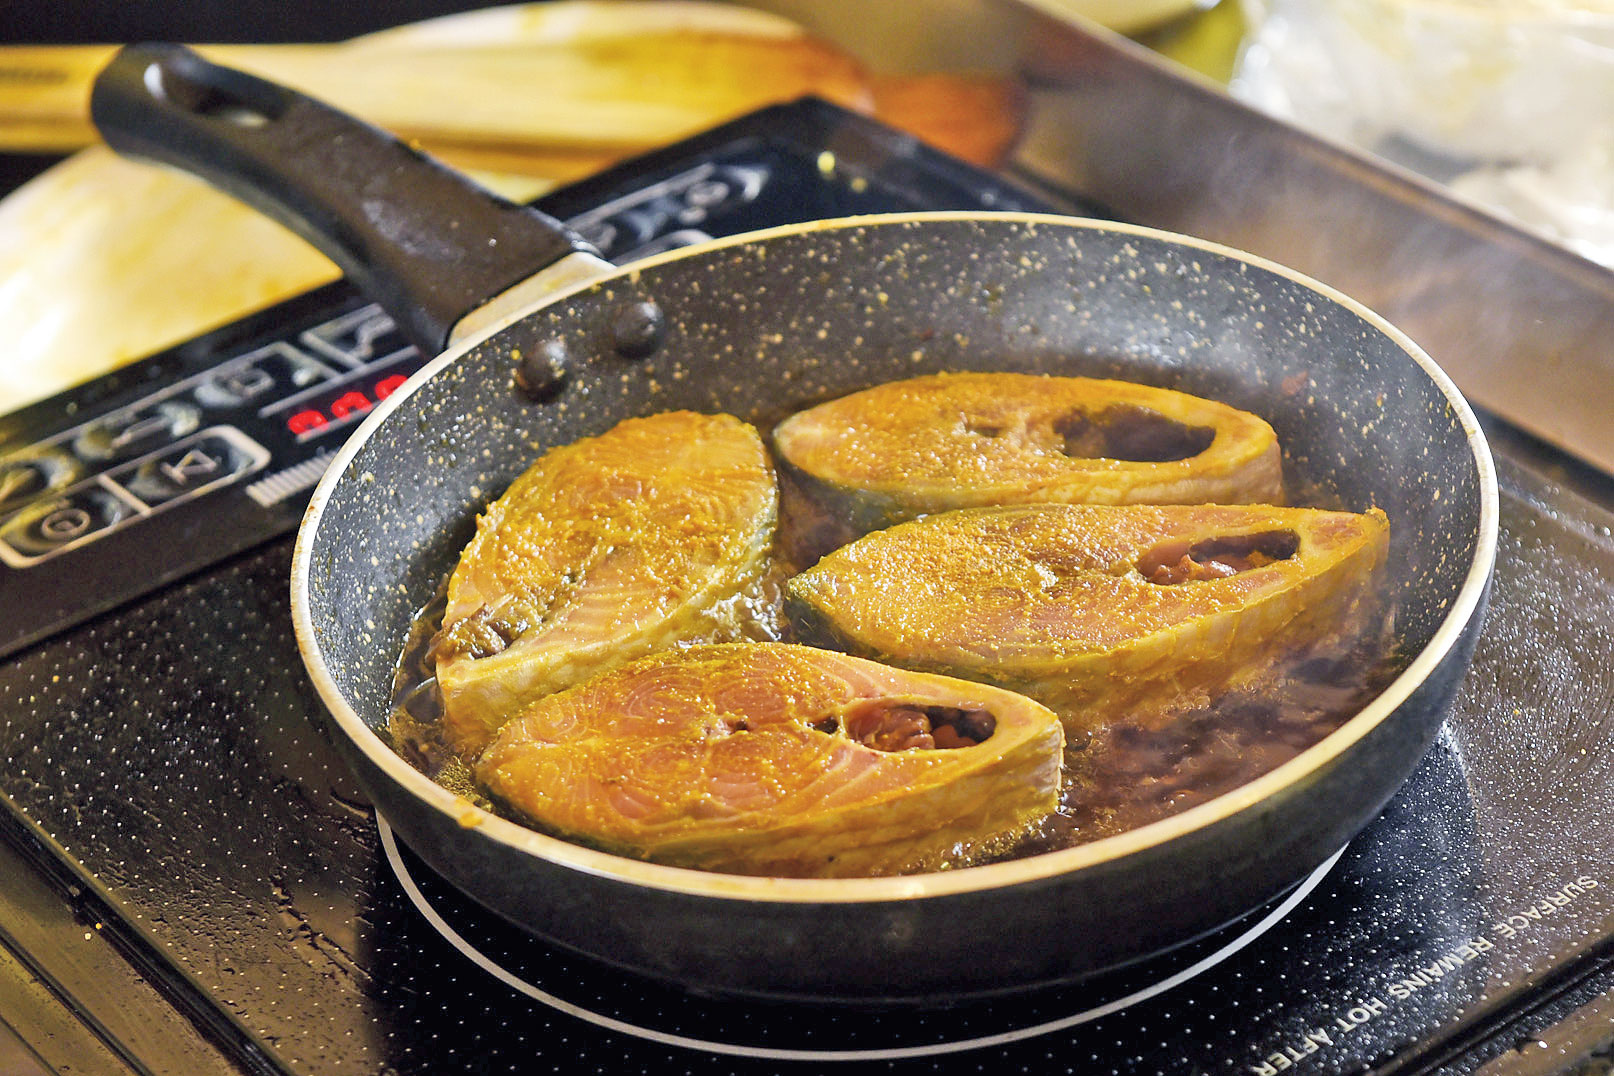 If there is will, there is hilsa